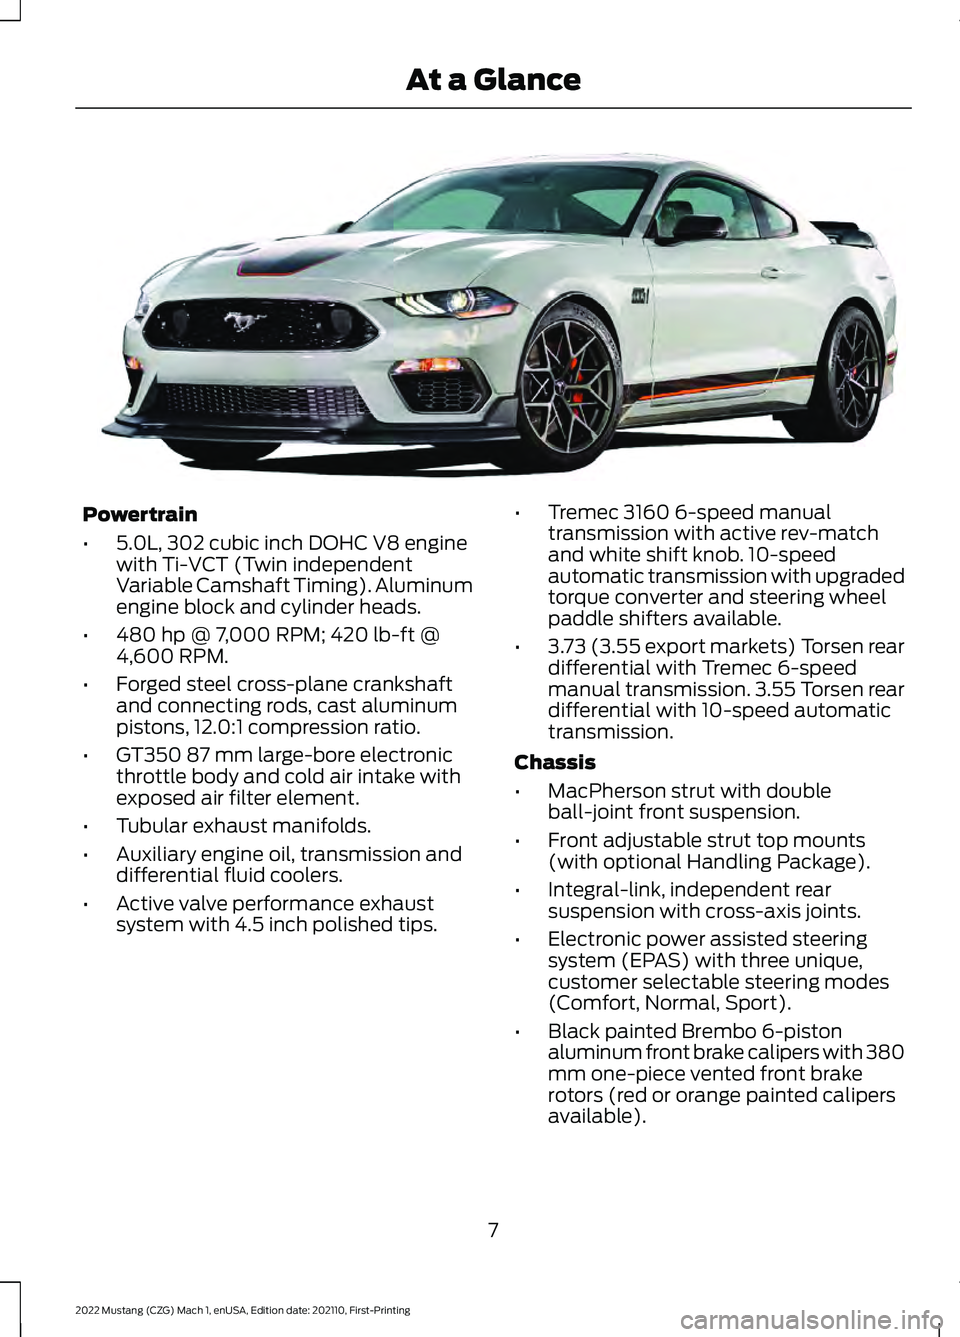 FORD MUSTANG 2022  Warranty Guide Powertrain
•
5.0L, 302 cubic inch DOHC V8 engine
with Ti-VCT (Twin independent
Variable Camshaft Timing). Aluminum
engine block and cylinder heads.
• 480 hp @ 7,000 RPM; 420 lb-ft @
4,600 RPM.
•